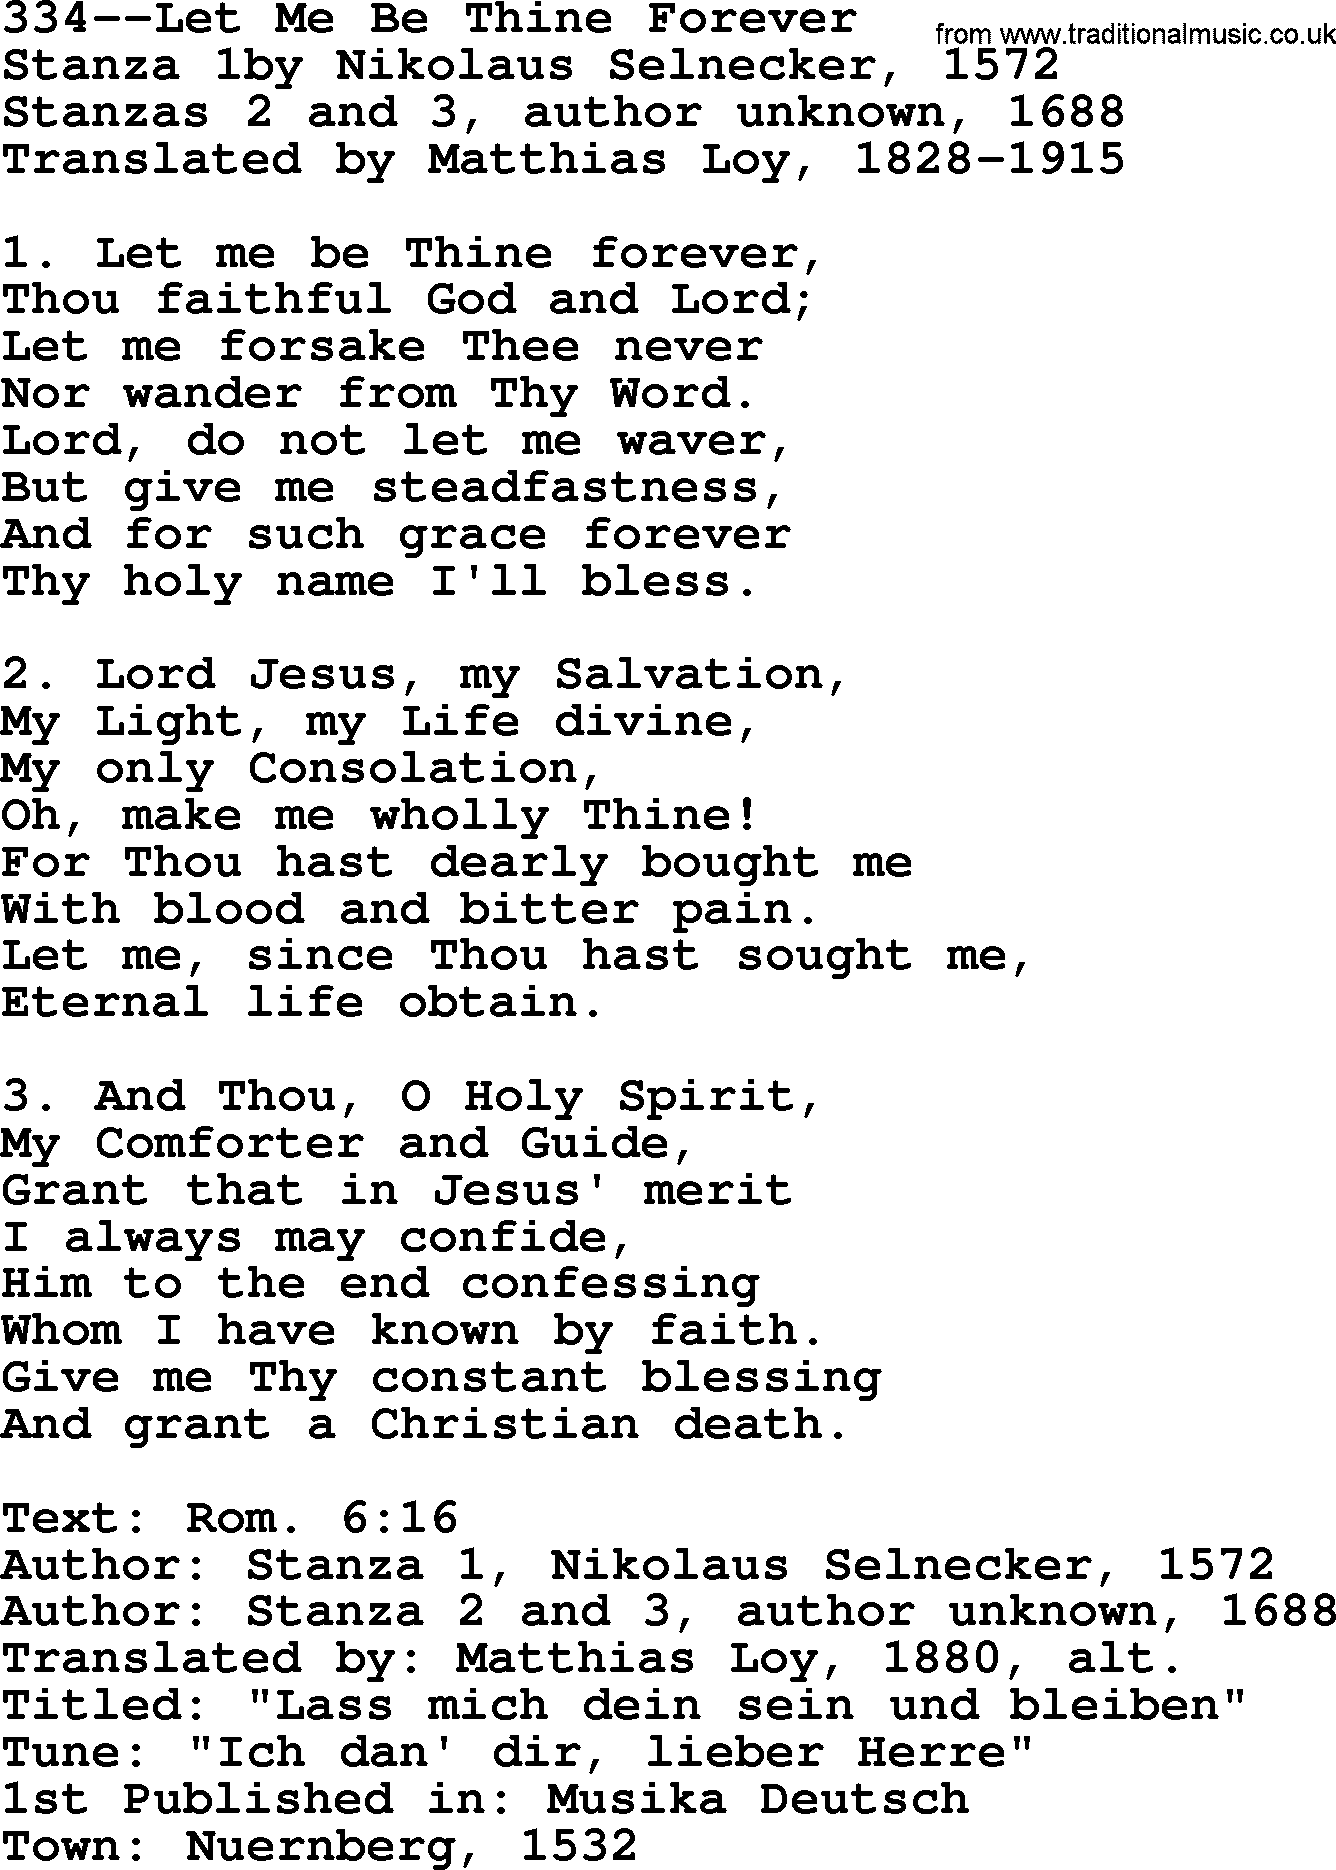 Lutheran Hymn: 334--Let Me Be Thine Forever.txt lyrics with PDF